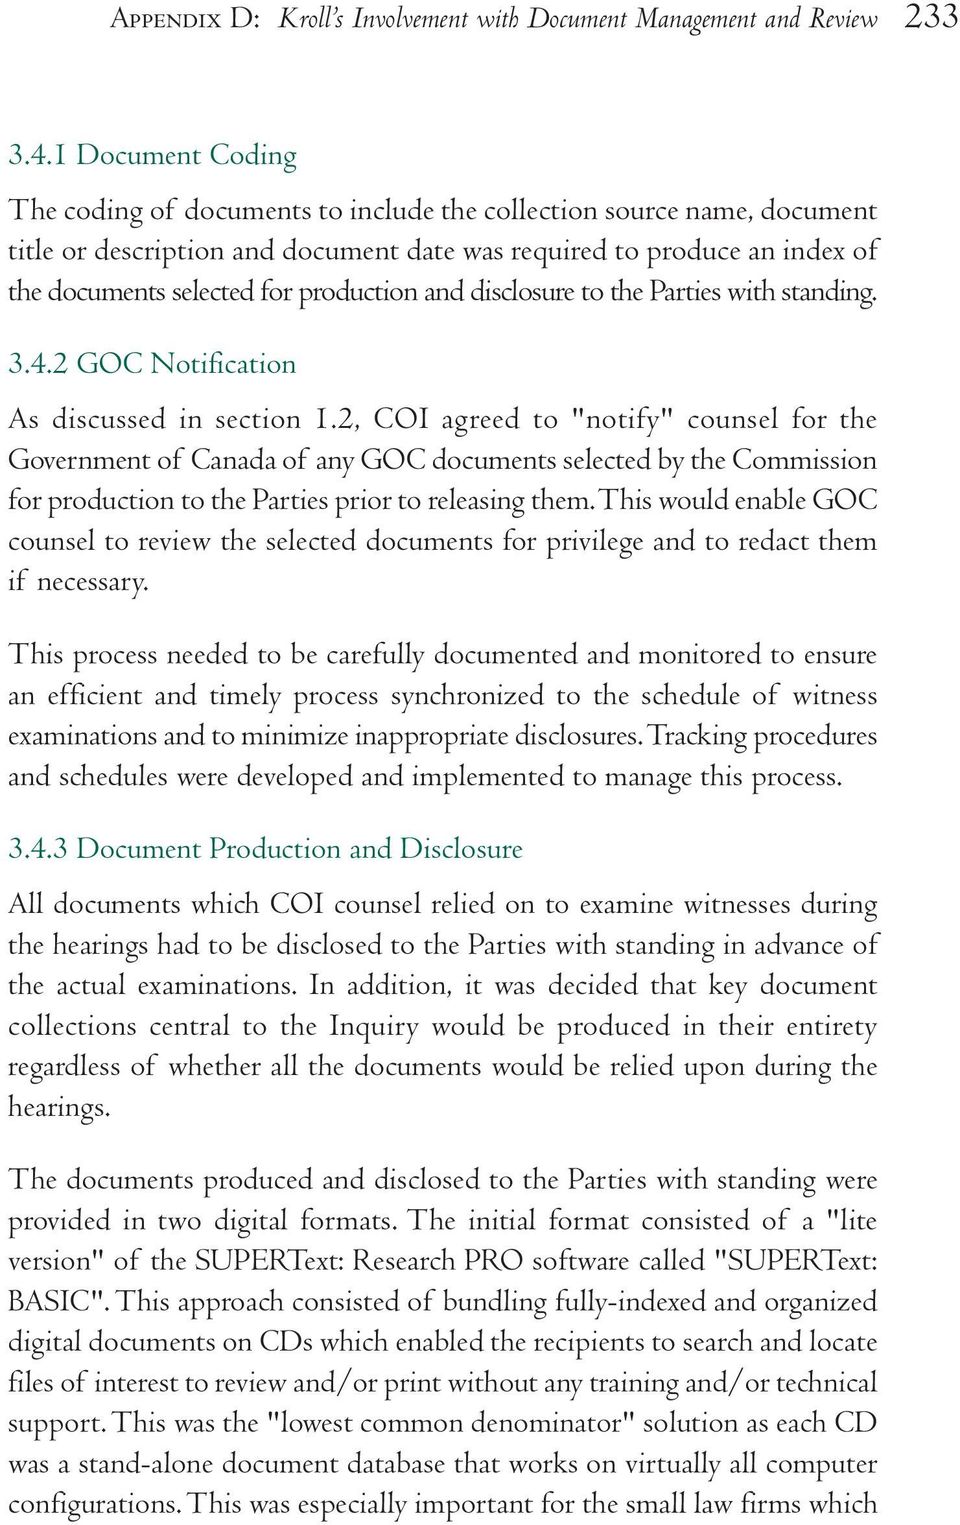 production and disclosure to the Parties with standing. 3.4.2 GOC Notification As discussed in section 1.